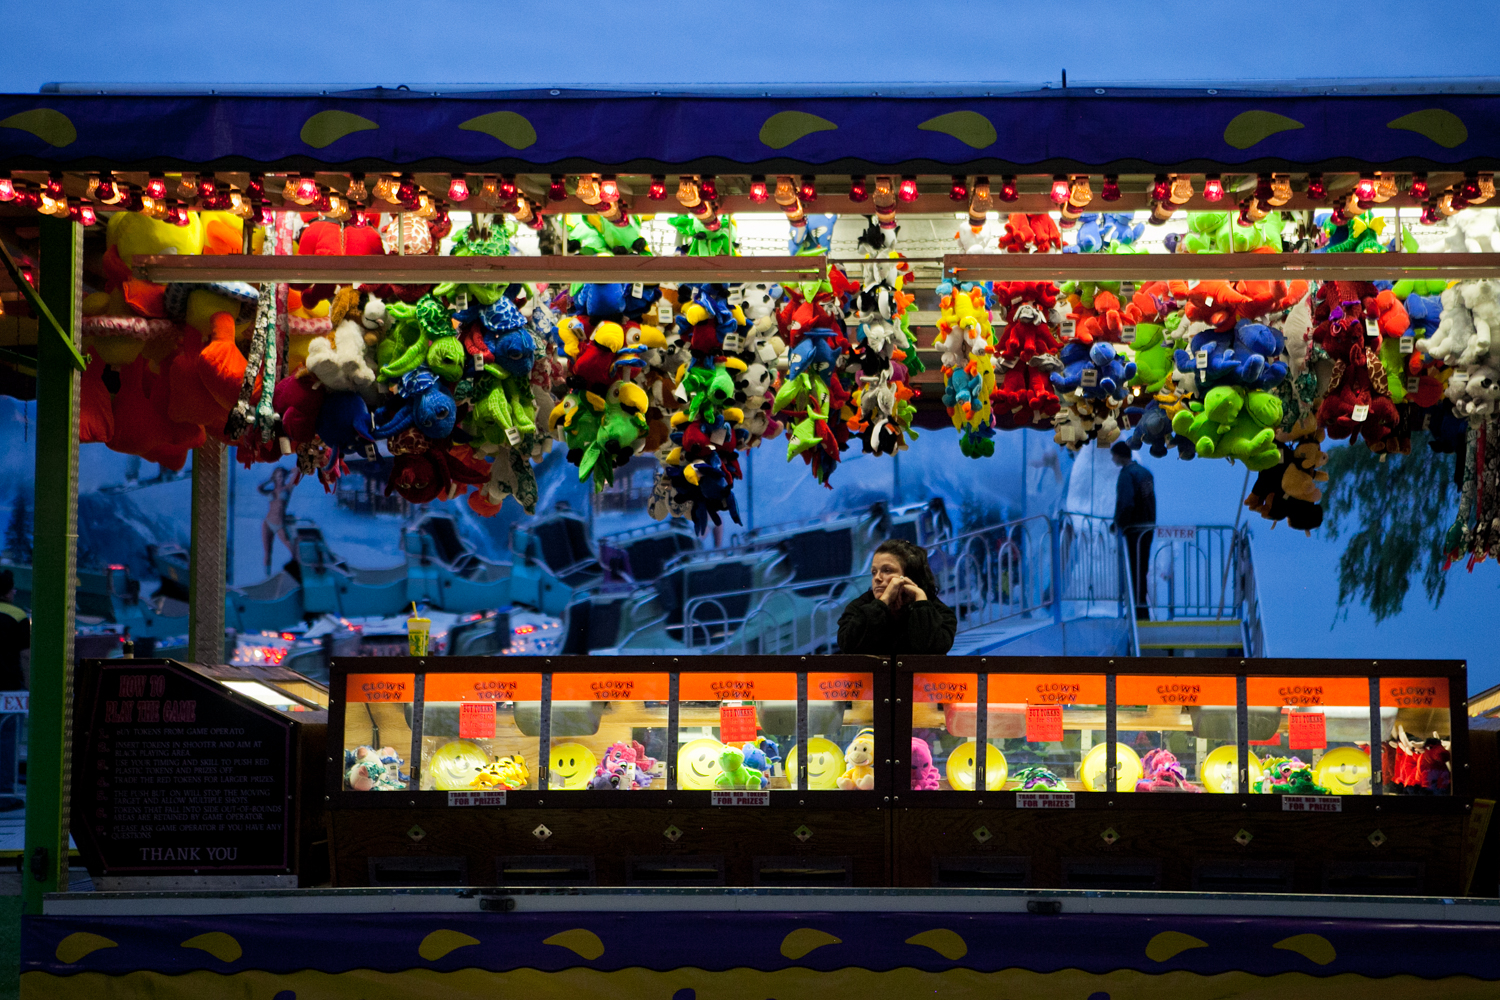  At each carnival location, workers are usually assigned to a specific ride, food stall, or game for the week’s duration. As night falls, a carnival worker waits for visitors to play her game. When the carnival is open, workers usually attend to ride